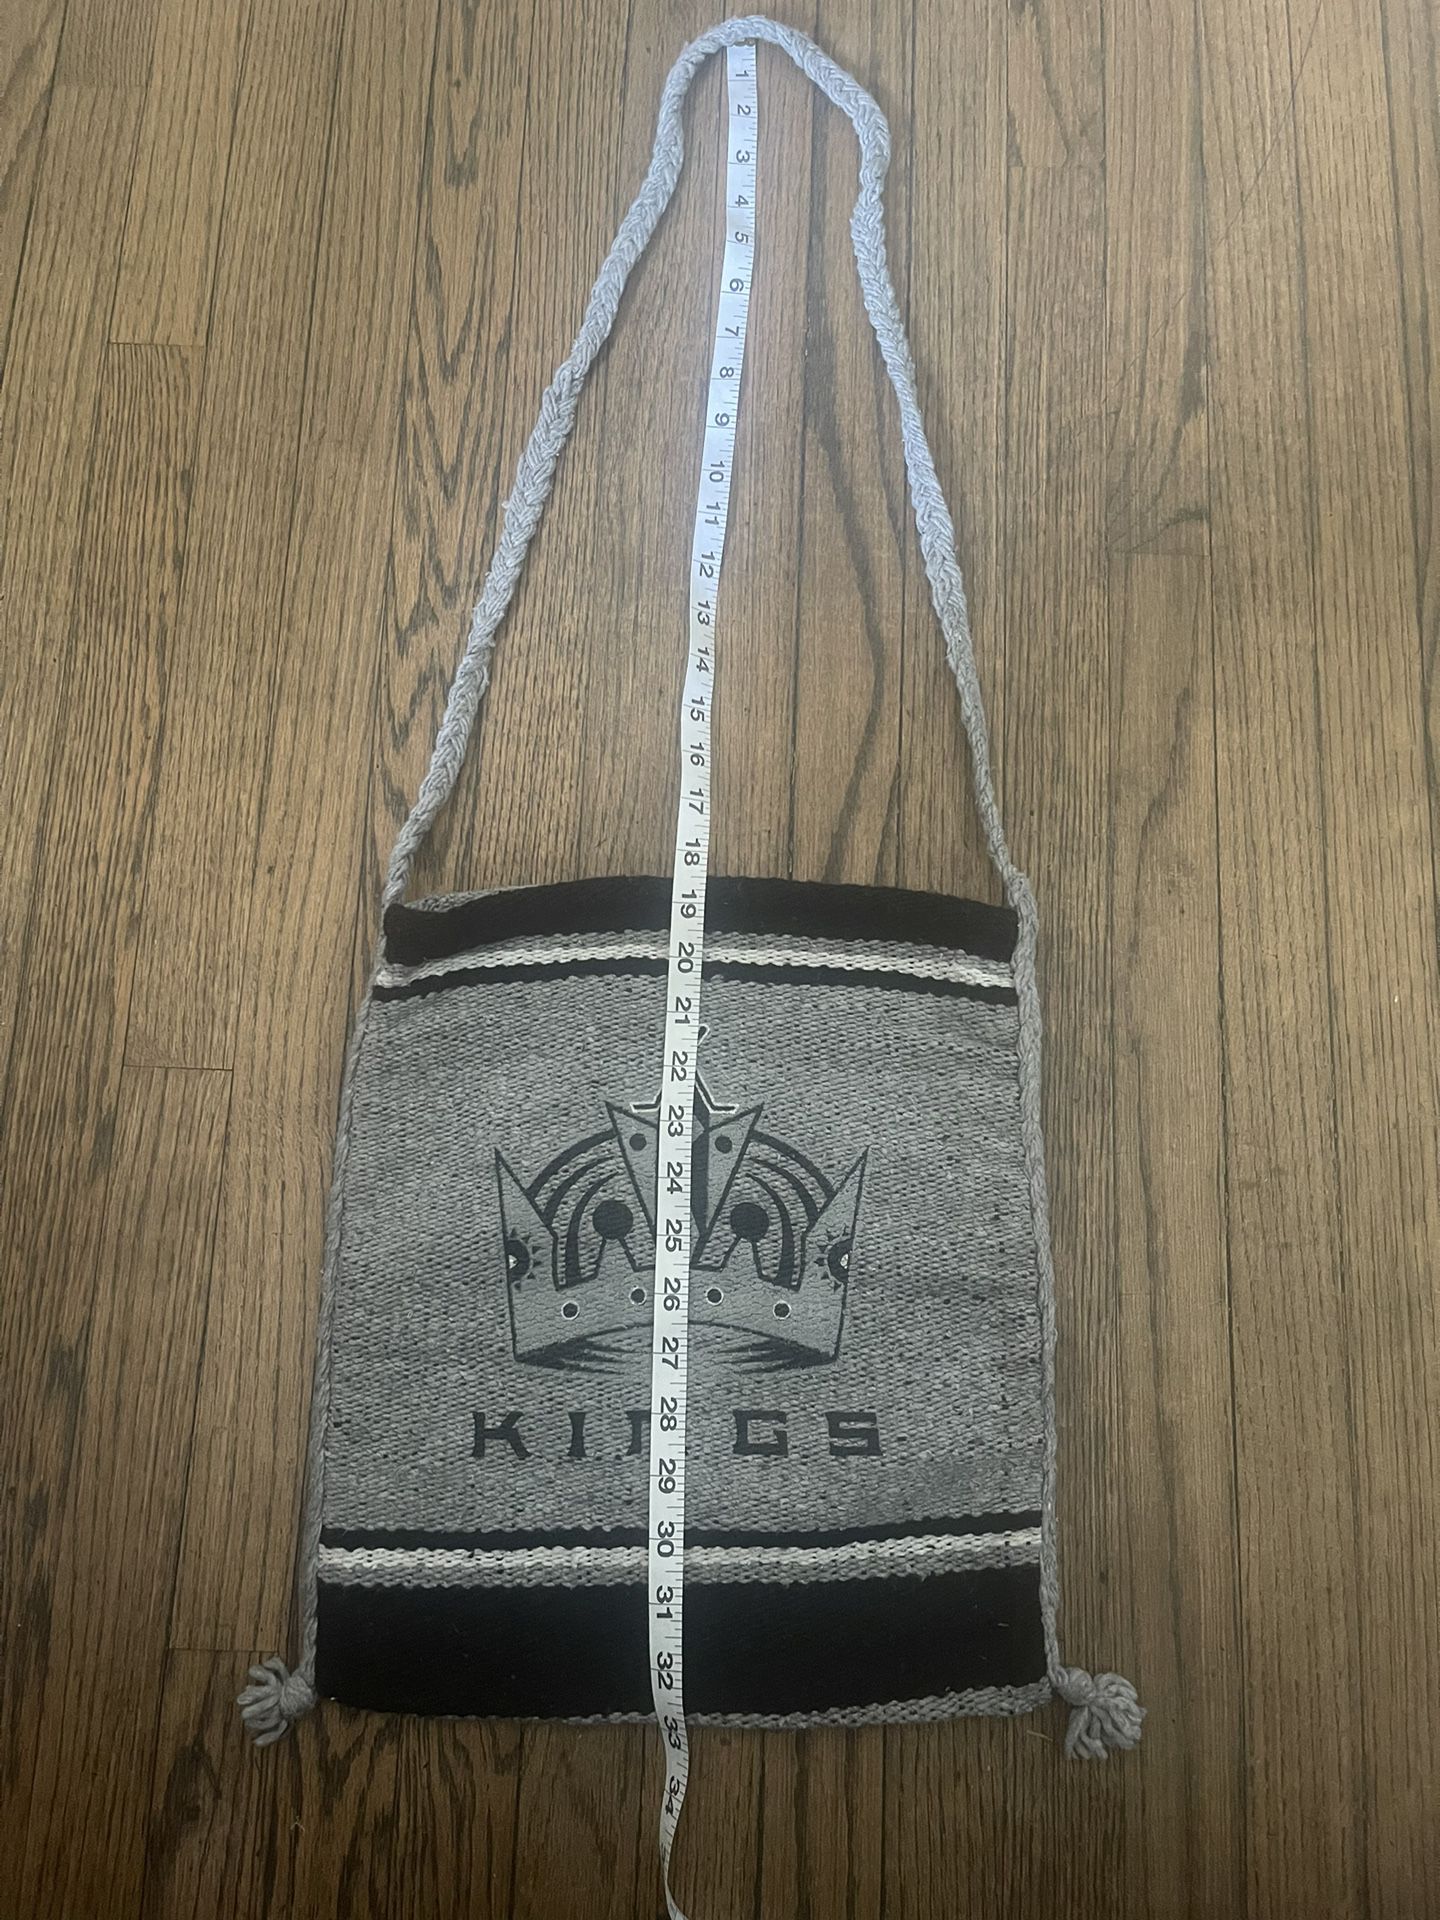 NEW LA Kings Tote Bag From Mexico - $10 (Firm) for Sale in Riverside, CA -  OfferUp